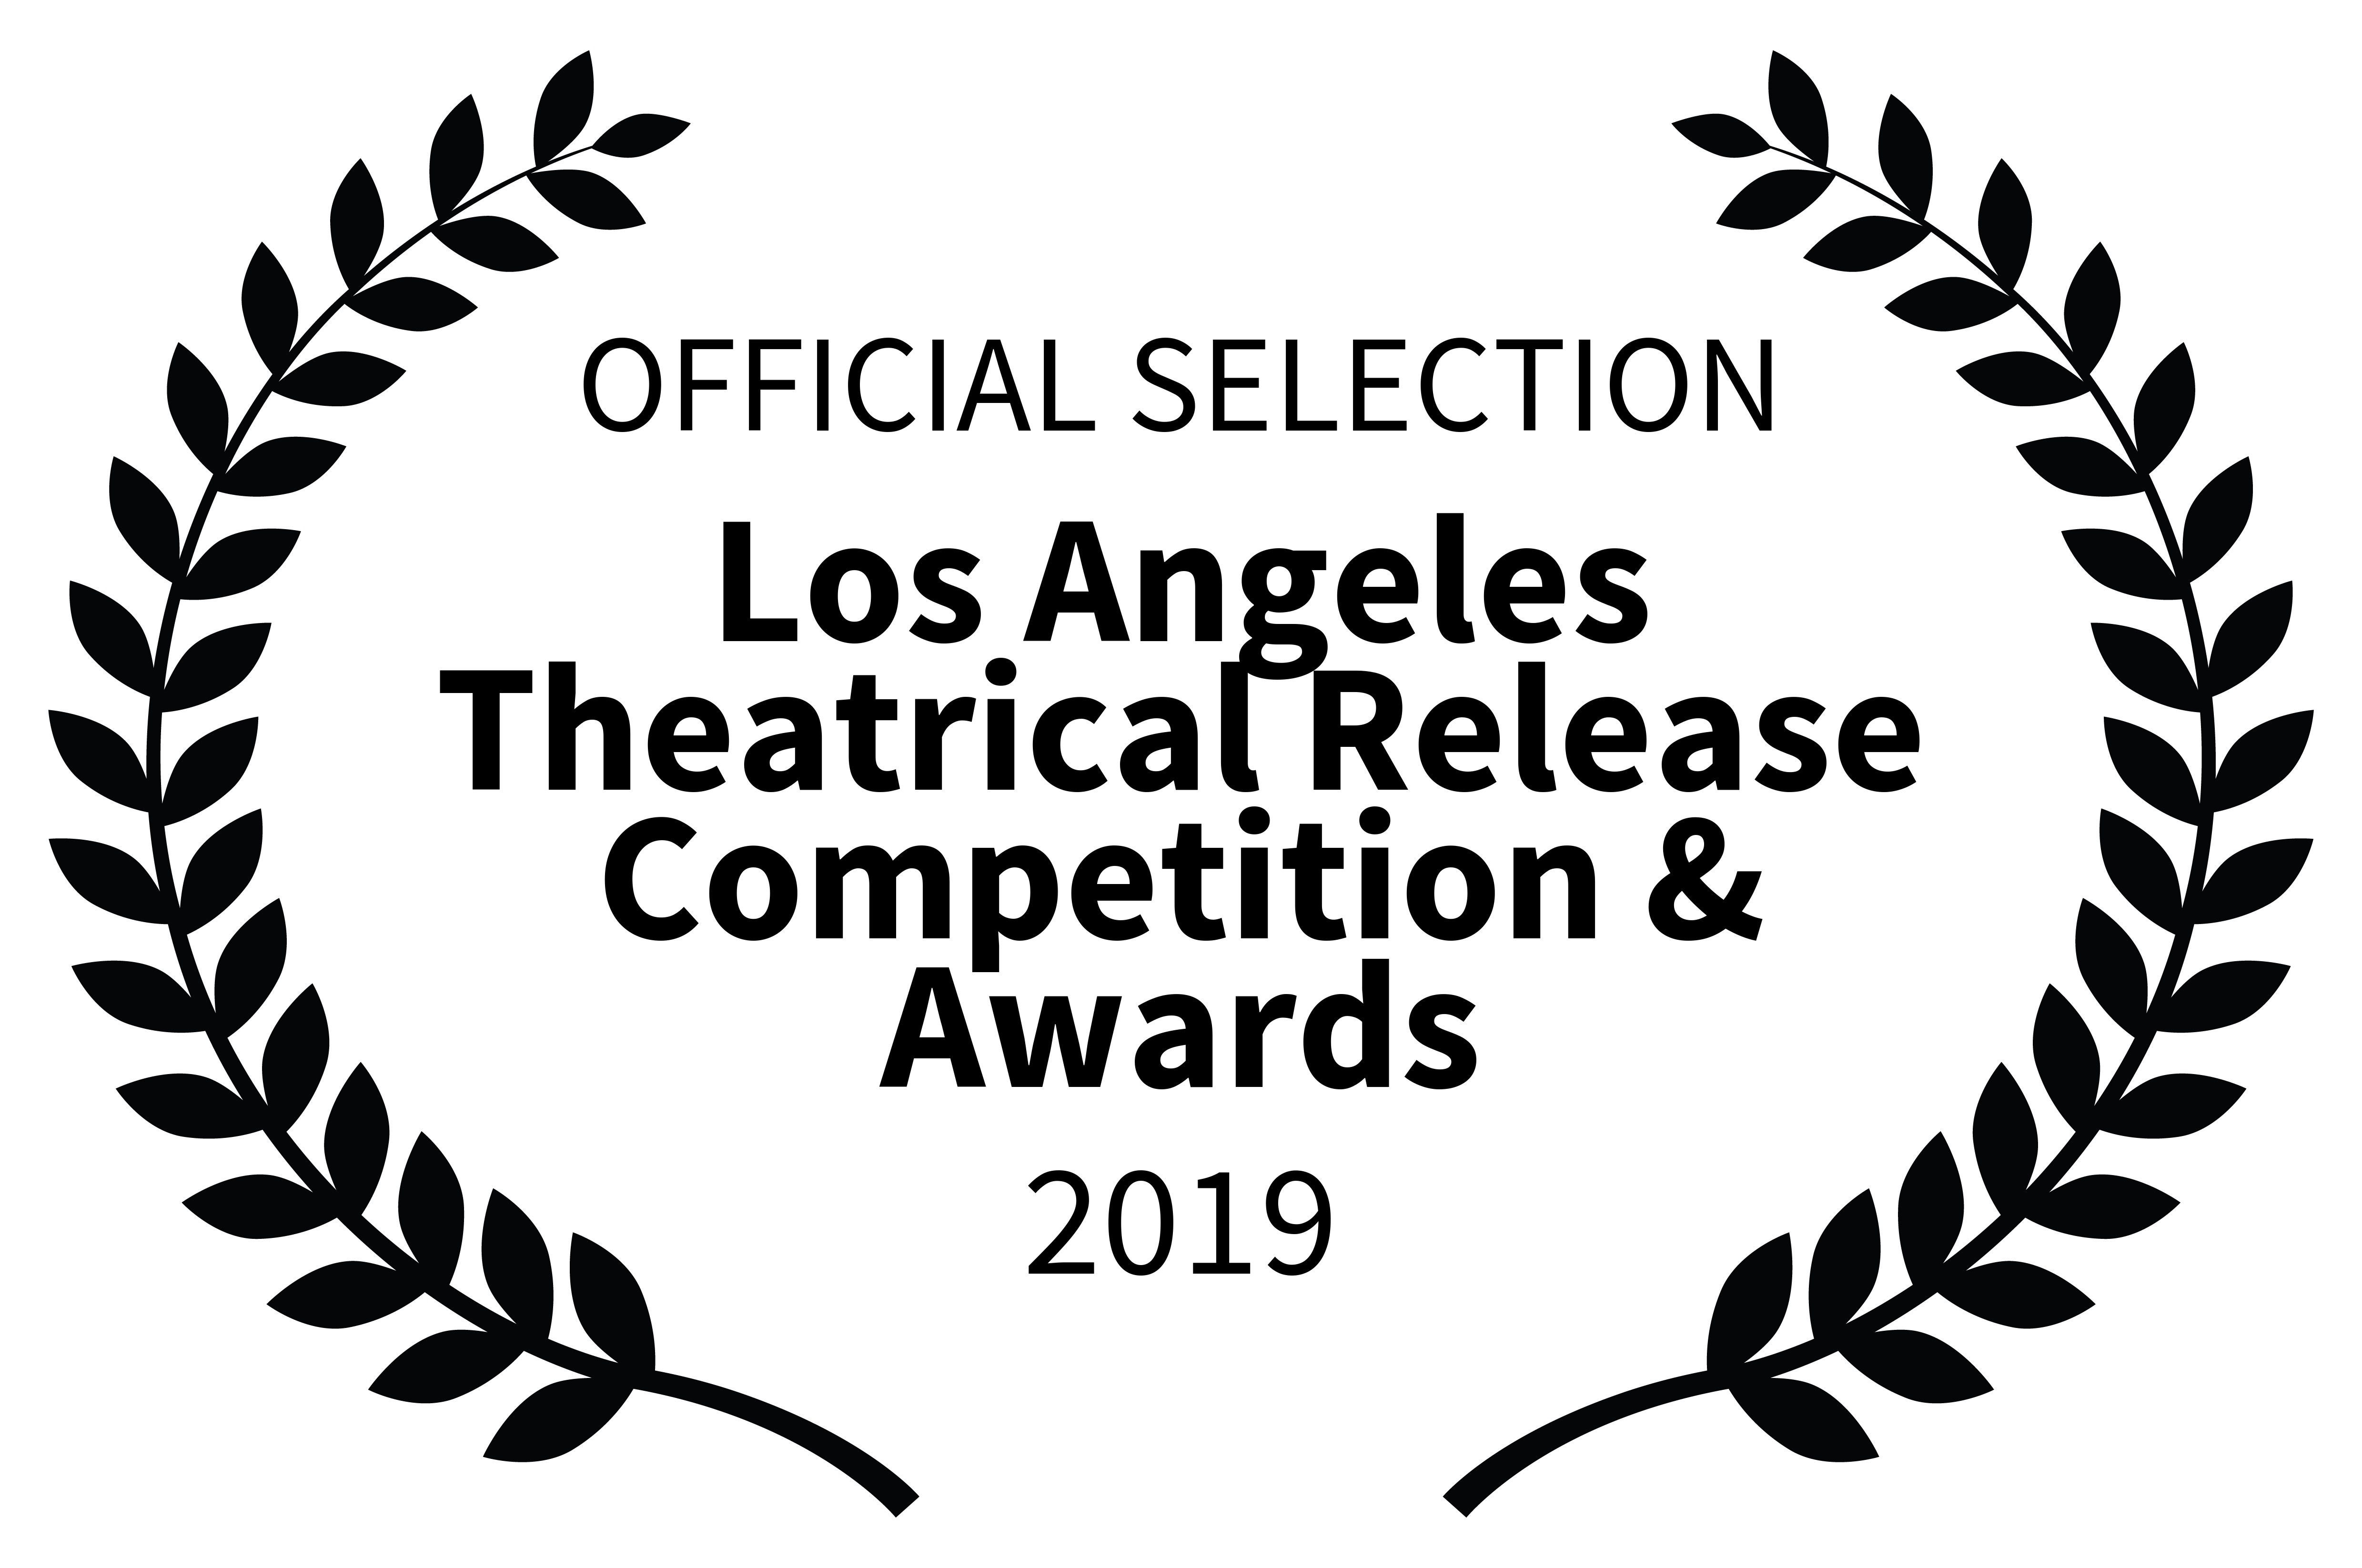 Los Angeles Theatrical Release Competition & Awards